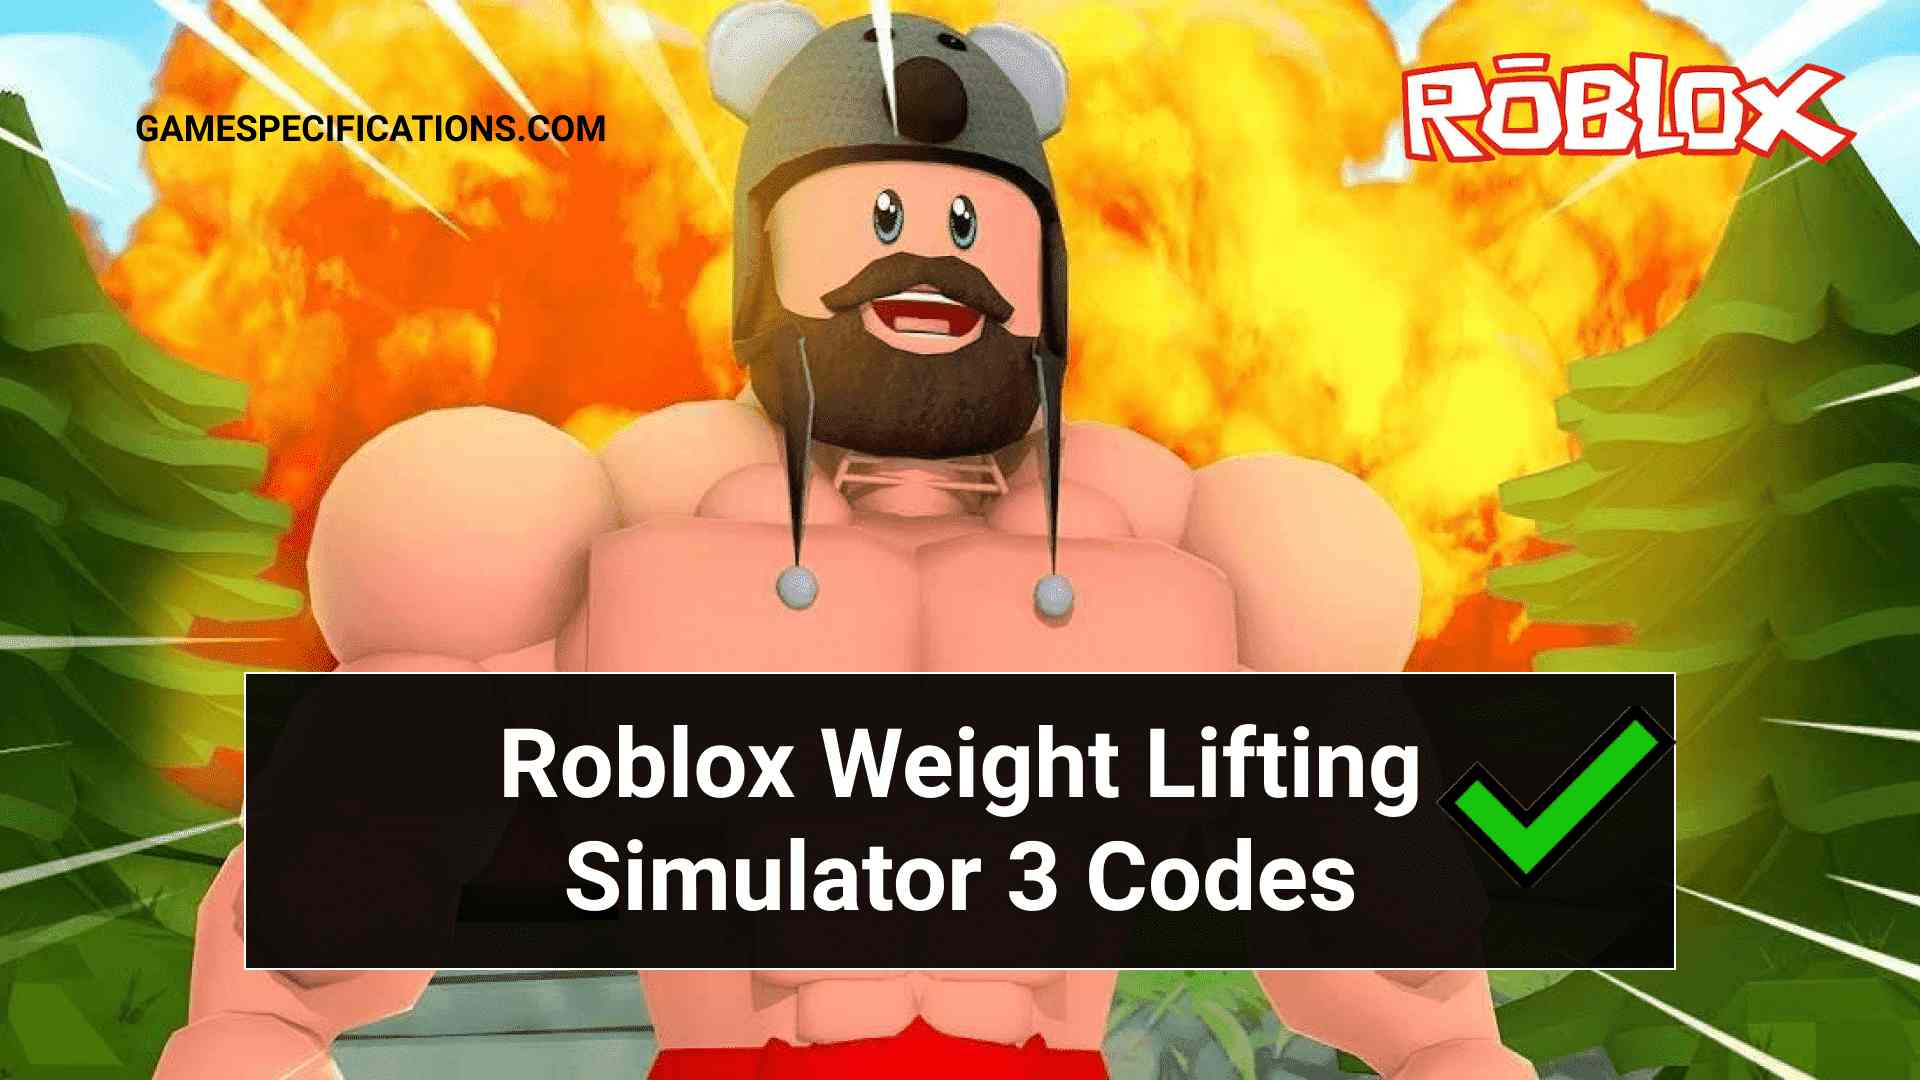 17 Roblox Weight Lifting Simulator 3 Codes July 2021 Game Specifications - the weight roblox id